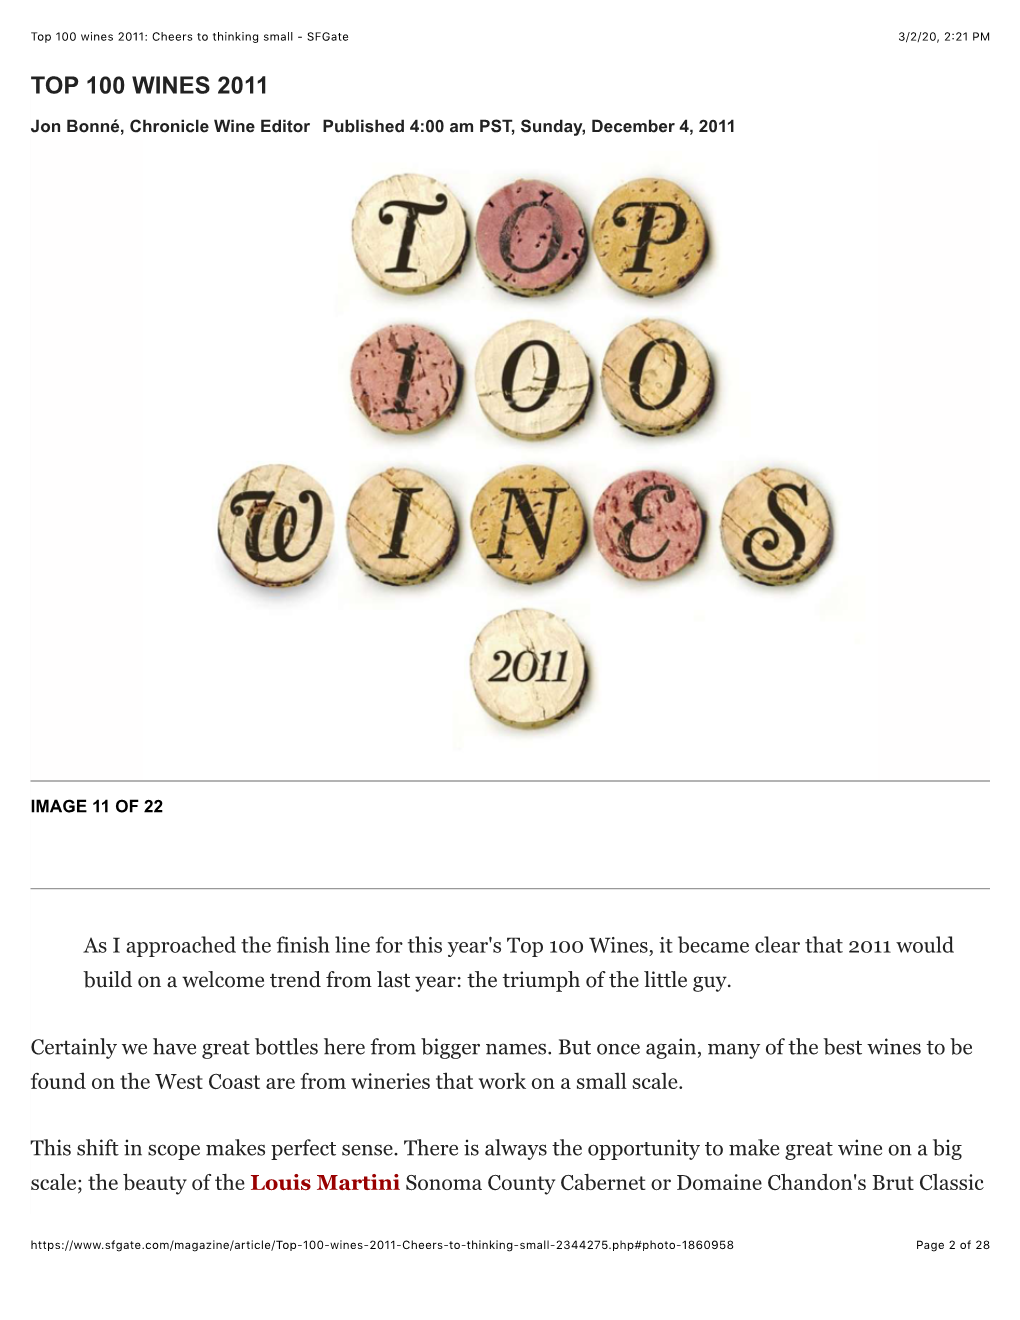 Top 100 Wines 2011: Cheers to Thinking Small - Sfgate 3/2/20, 2'21 PM